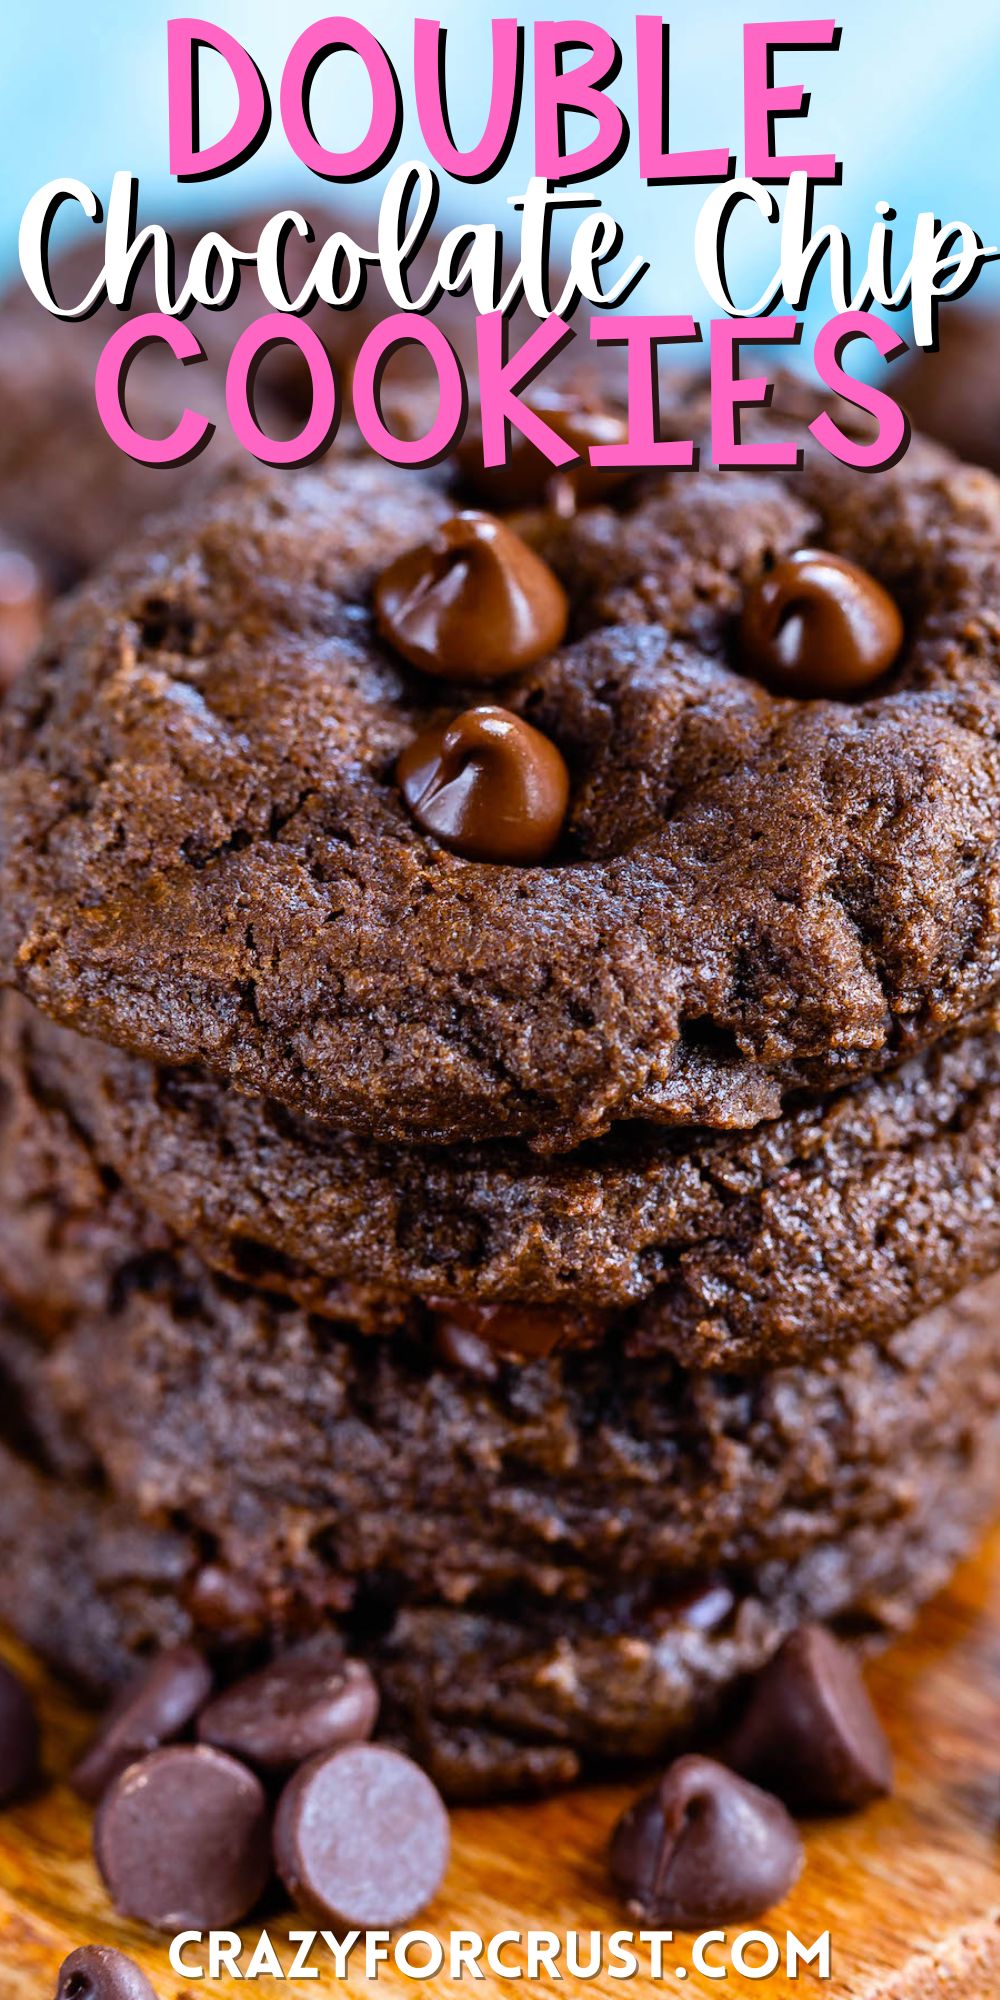 stacked chocolate cookies with chocolate chips baked in with words on the image.